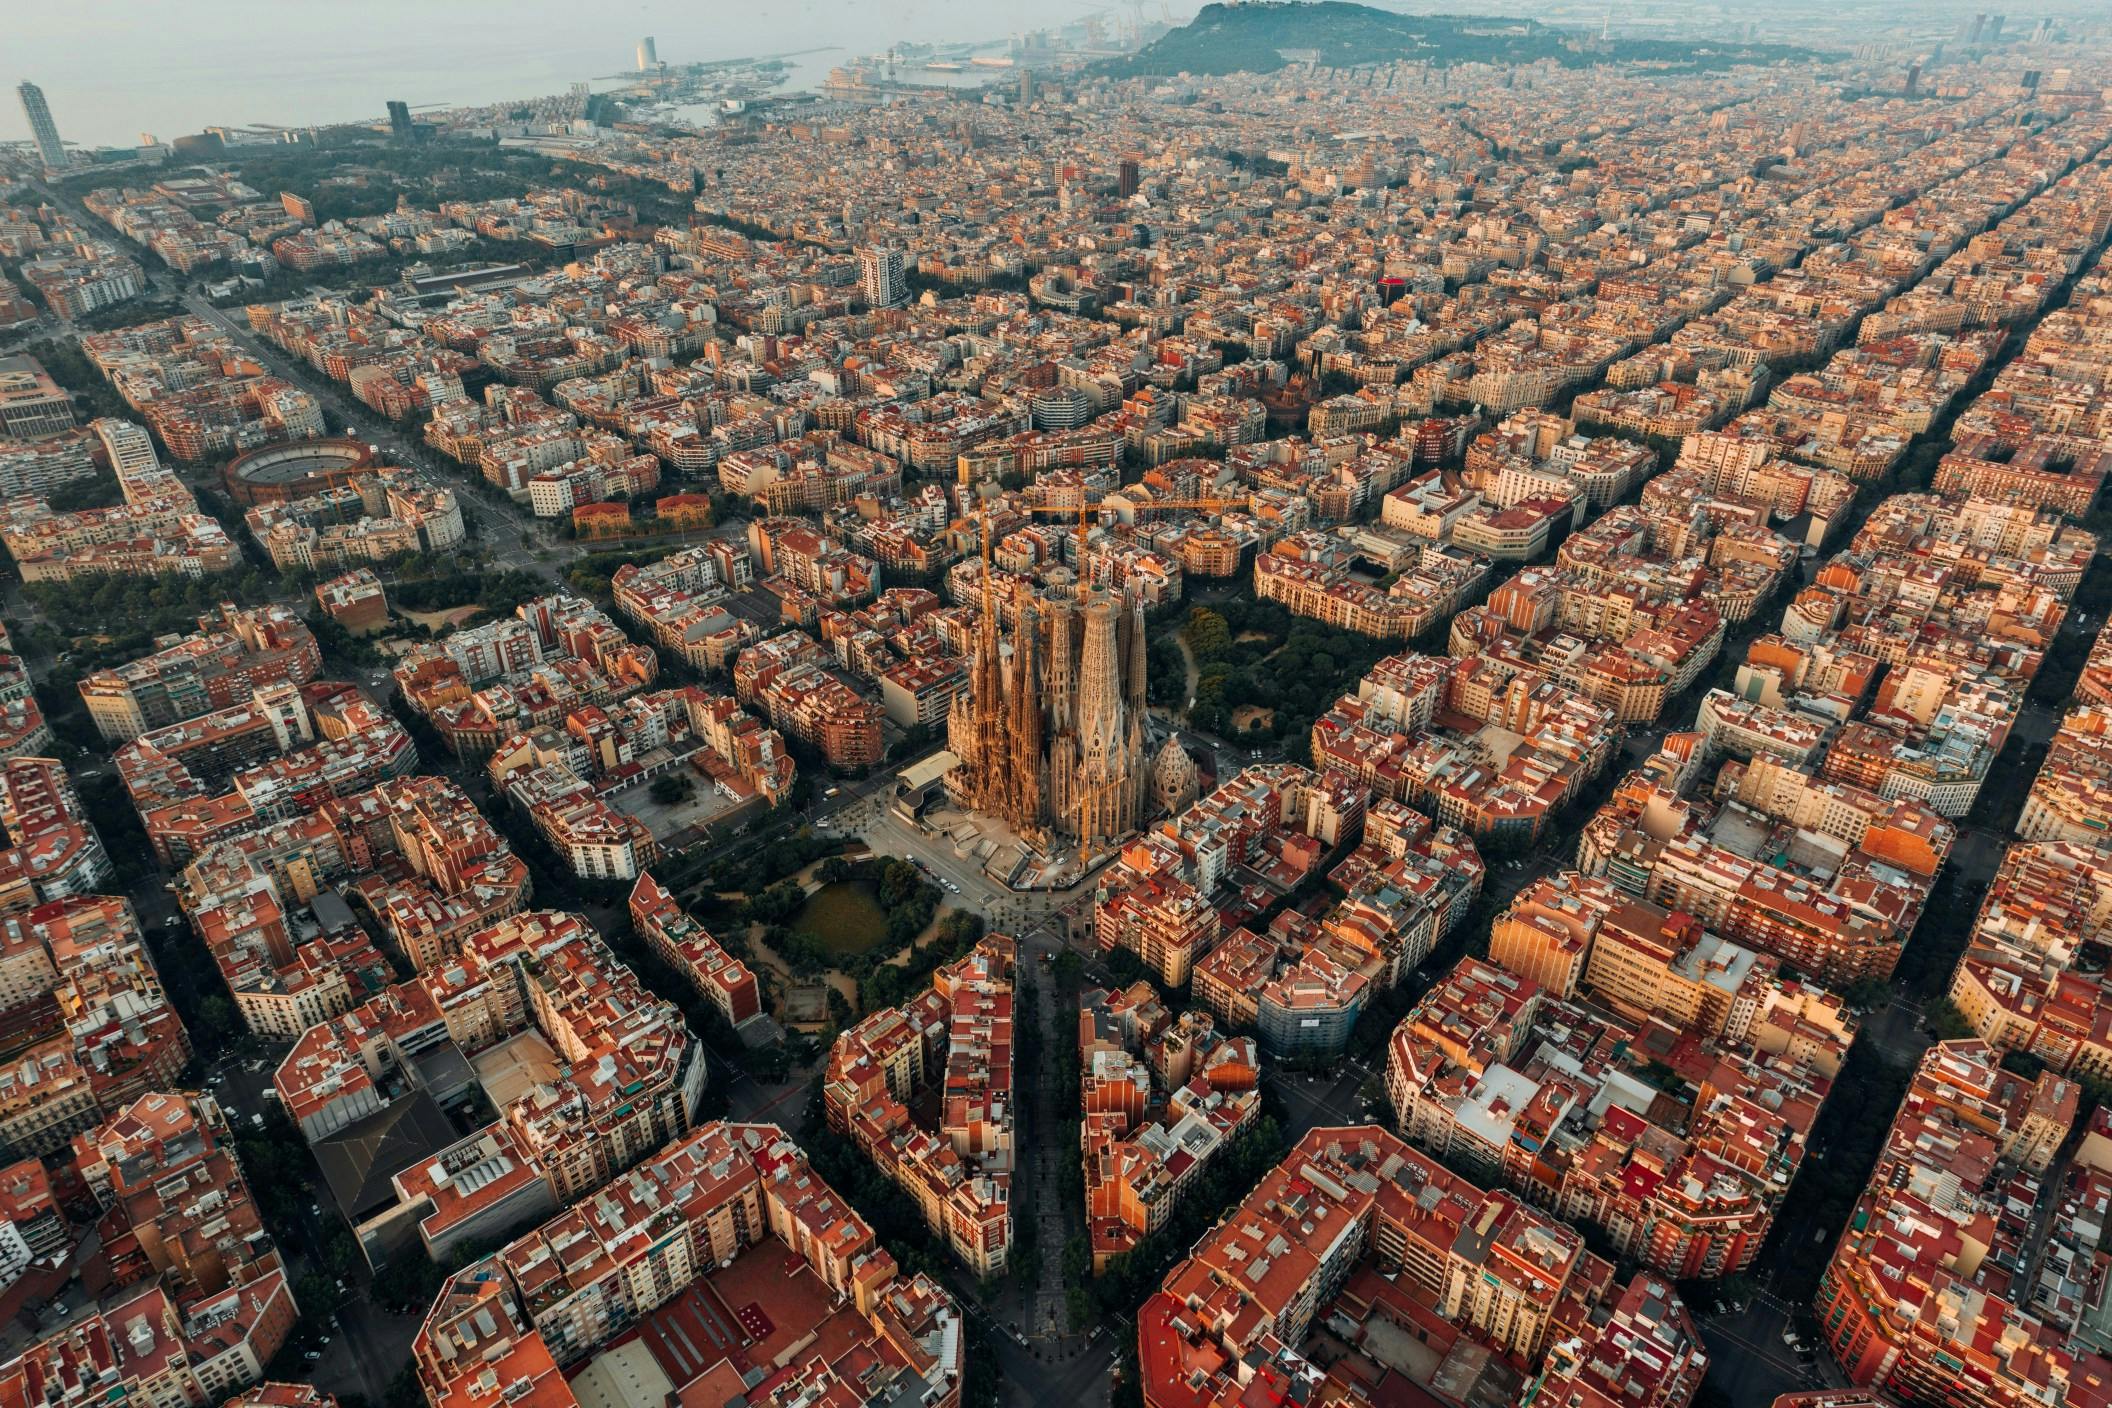 A bird's eye view of the uniform city blocks of Barcelona, Spain. The Sagrada Familia protrudes above the center of the city. The reddish-orange rooftops of the buildings create a glow from the perspective of the image. 